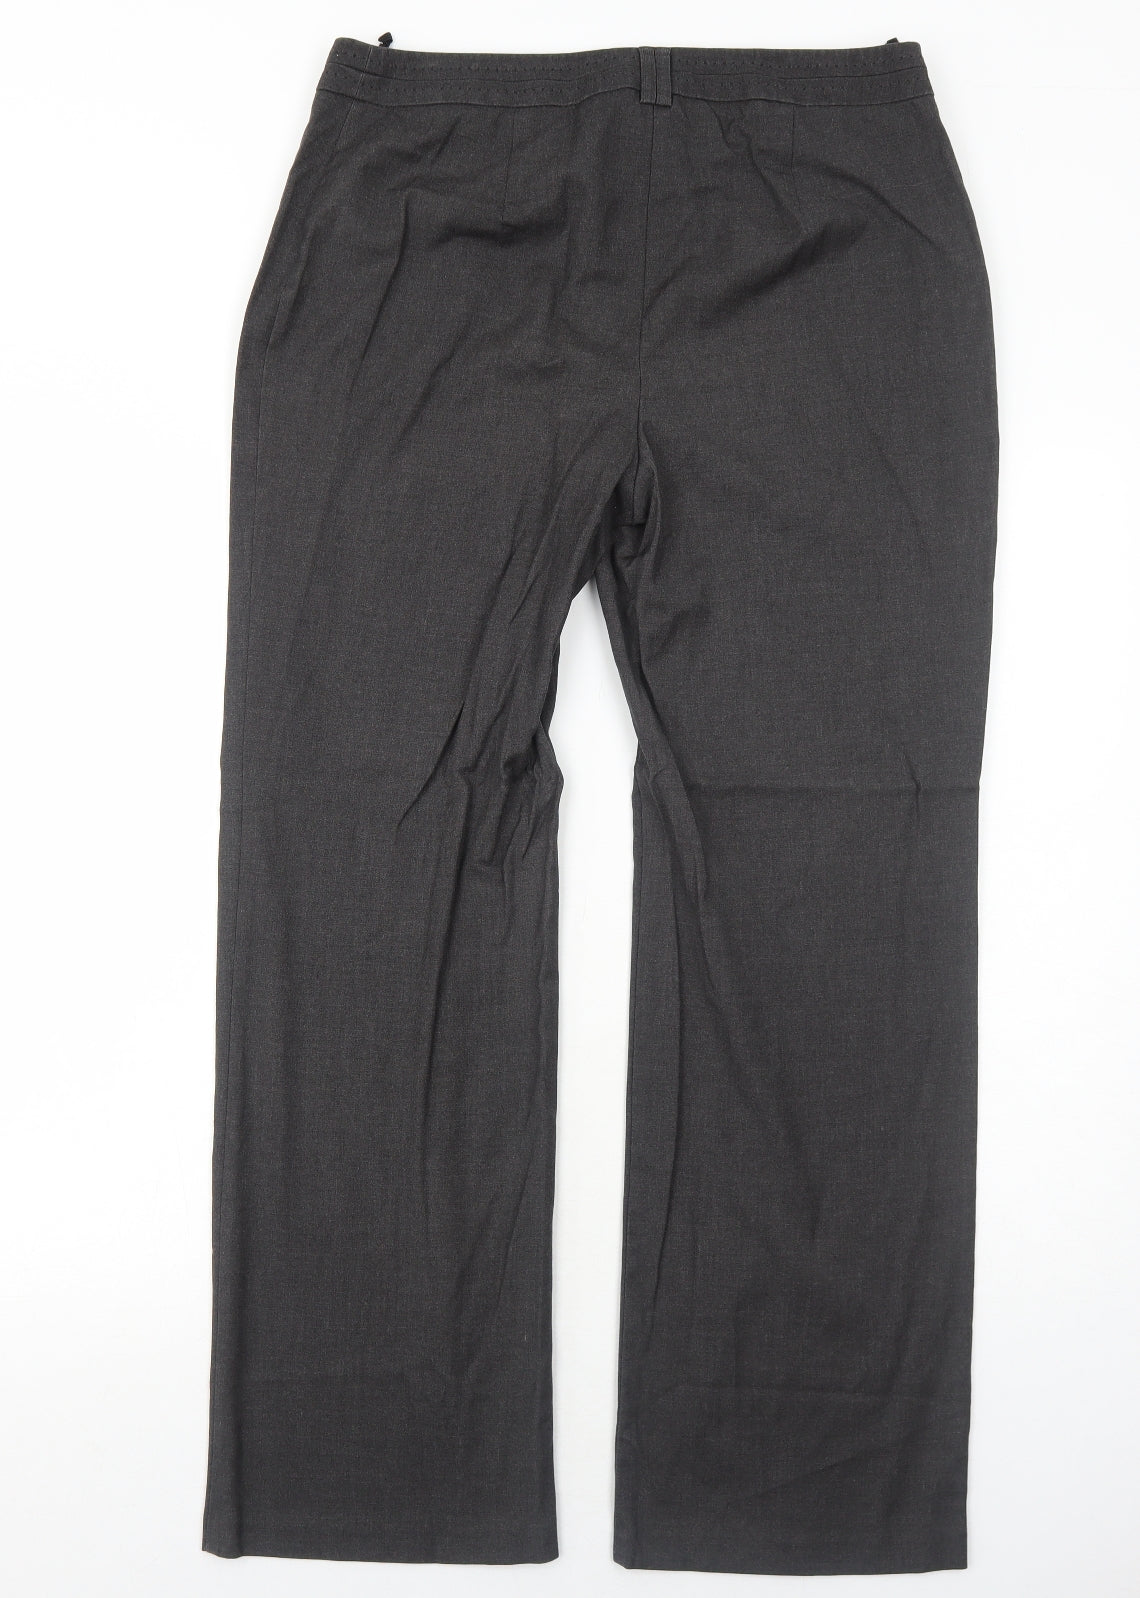 Marks and Spencer Womens Grey Polyester Dress Pants Trousers Size 14 Regular Zip